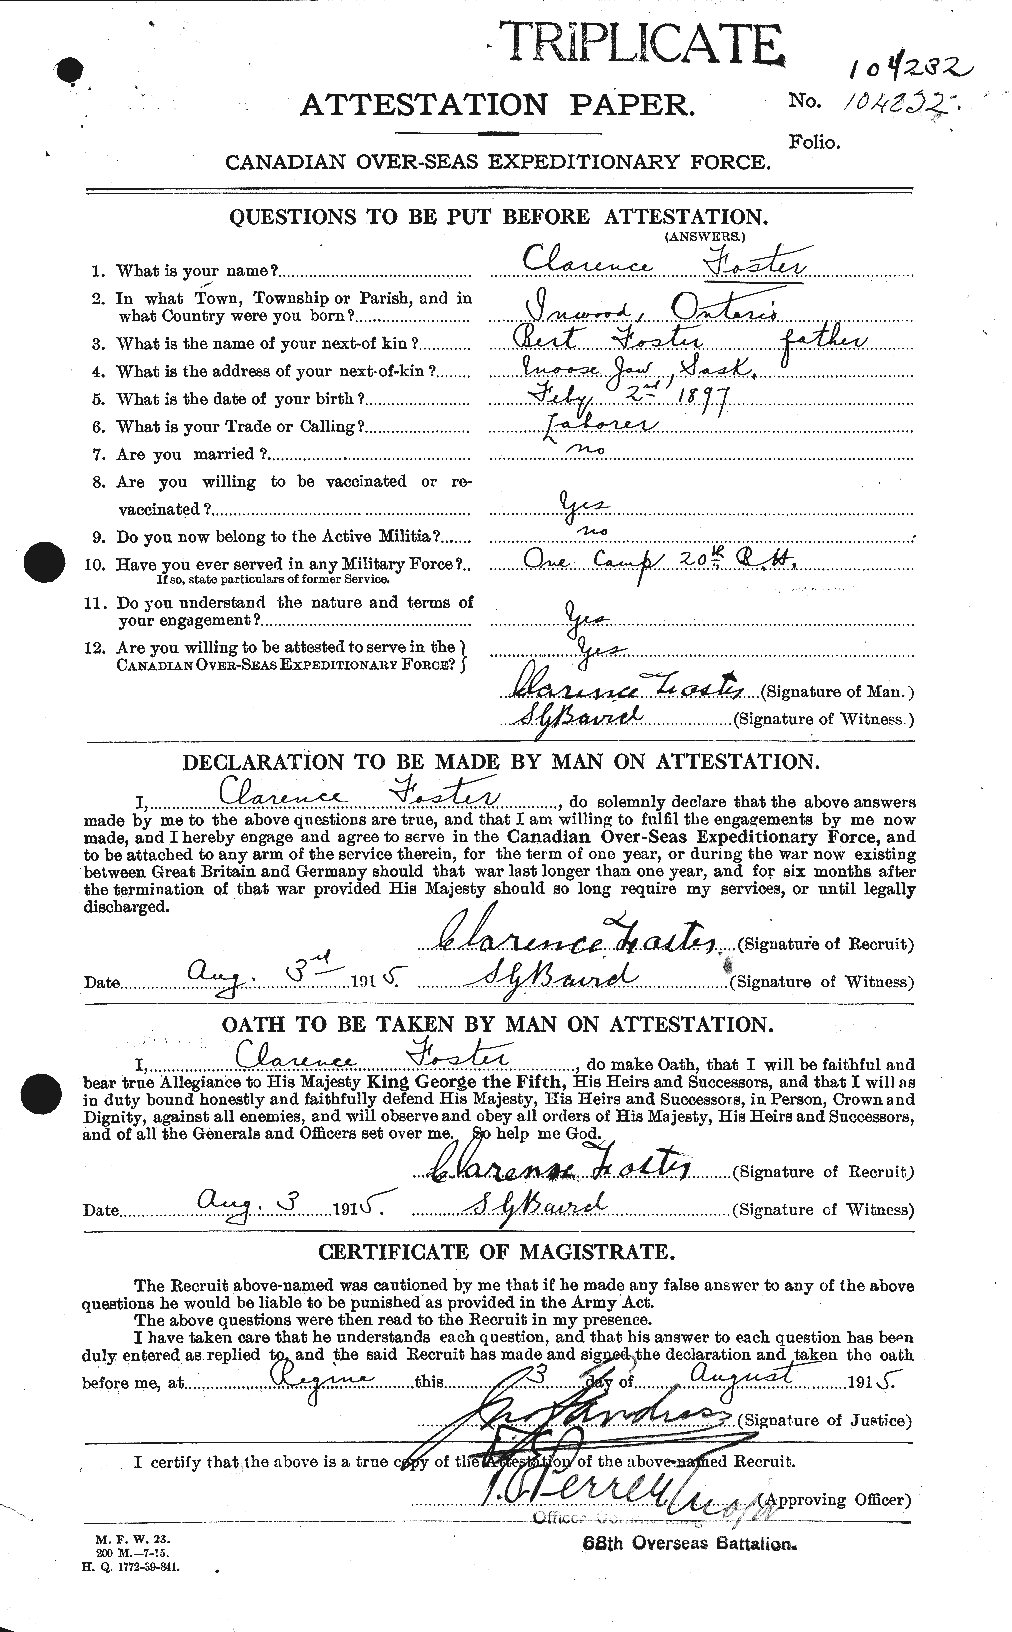 Personnel Records of the First World War - CEF 330534a